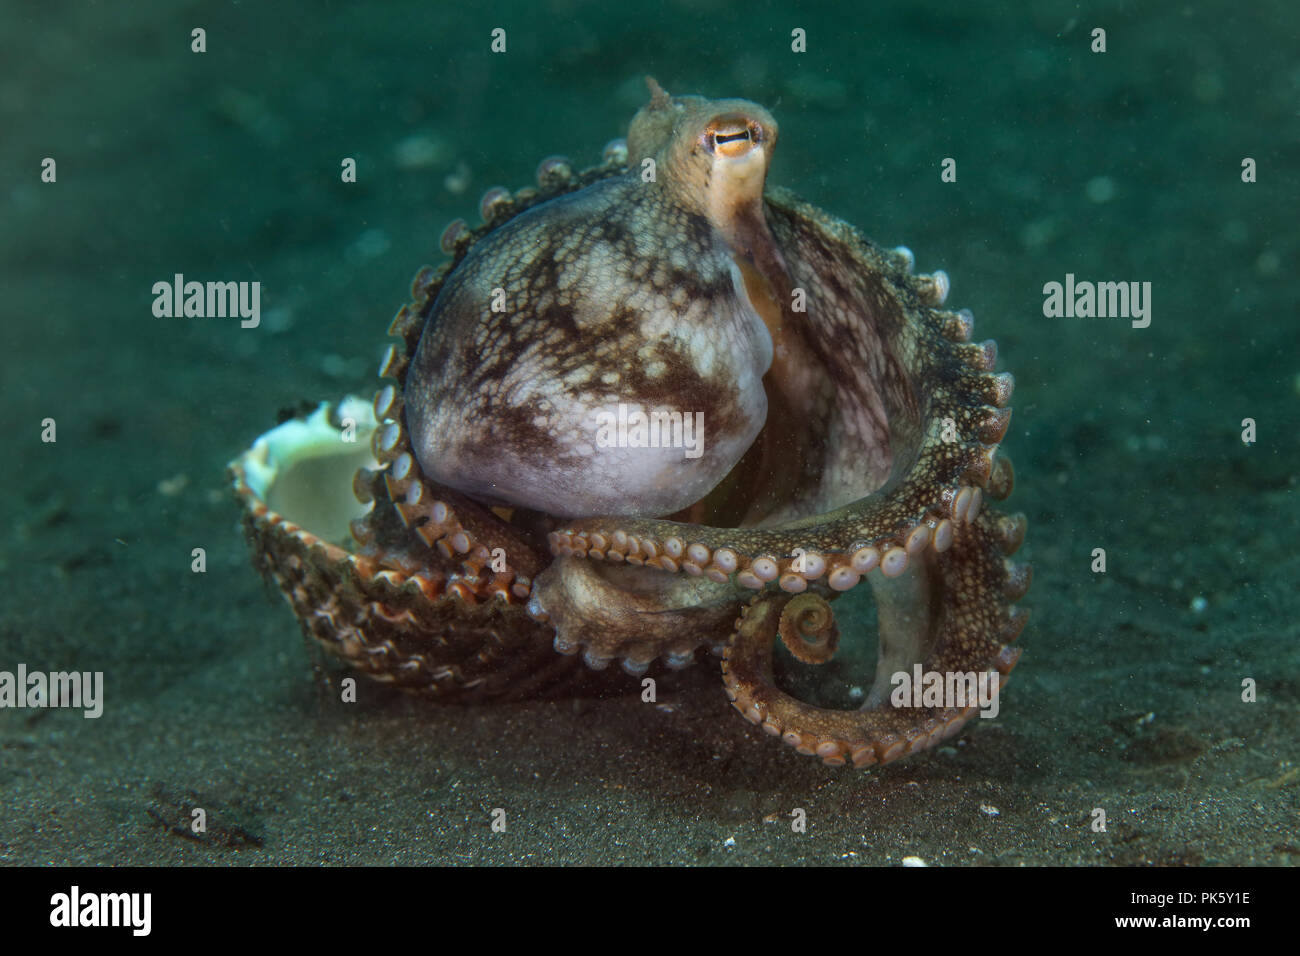 Coconut octopus (Amphioctopus marginatus) using seashell for shelter. Picture was taken in Lembeh Strait, Indonesia Stock Photo